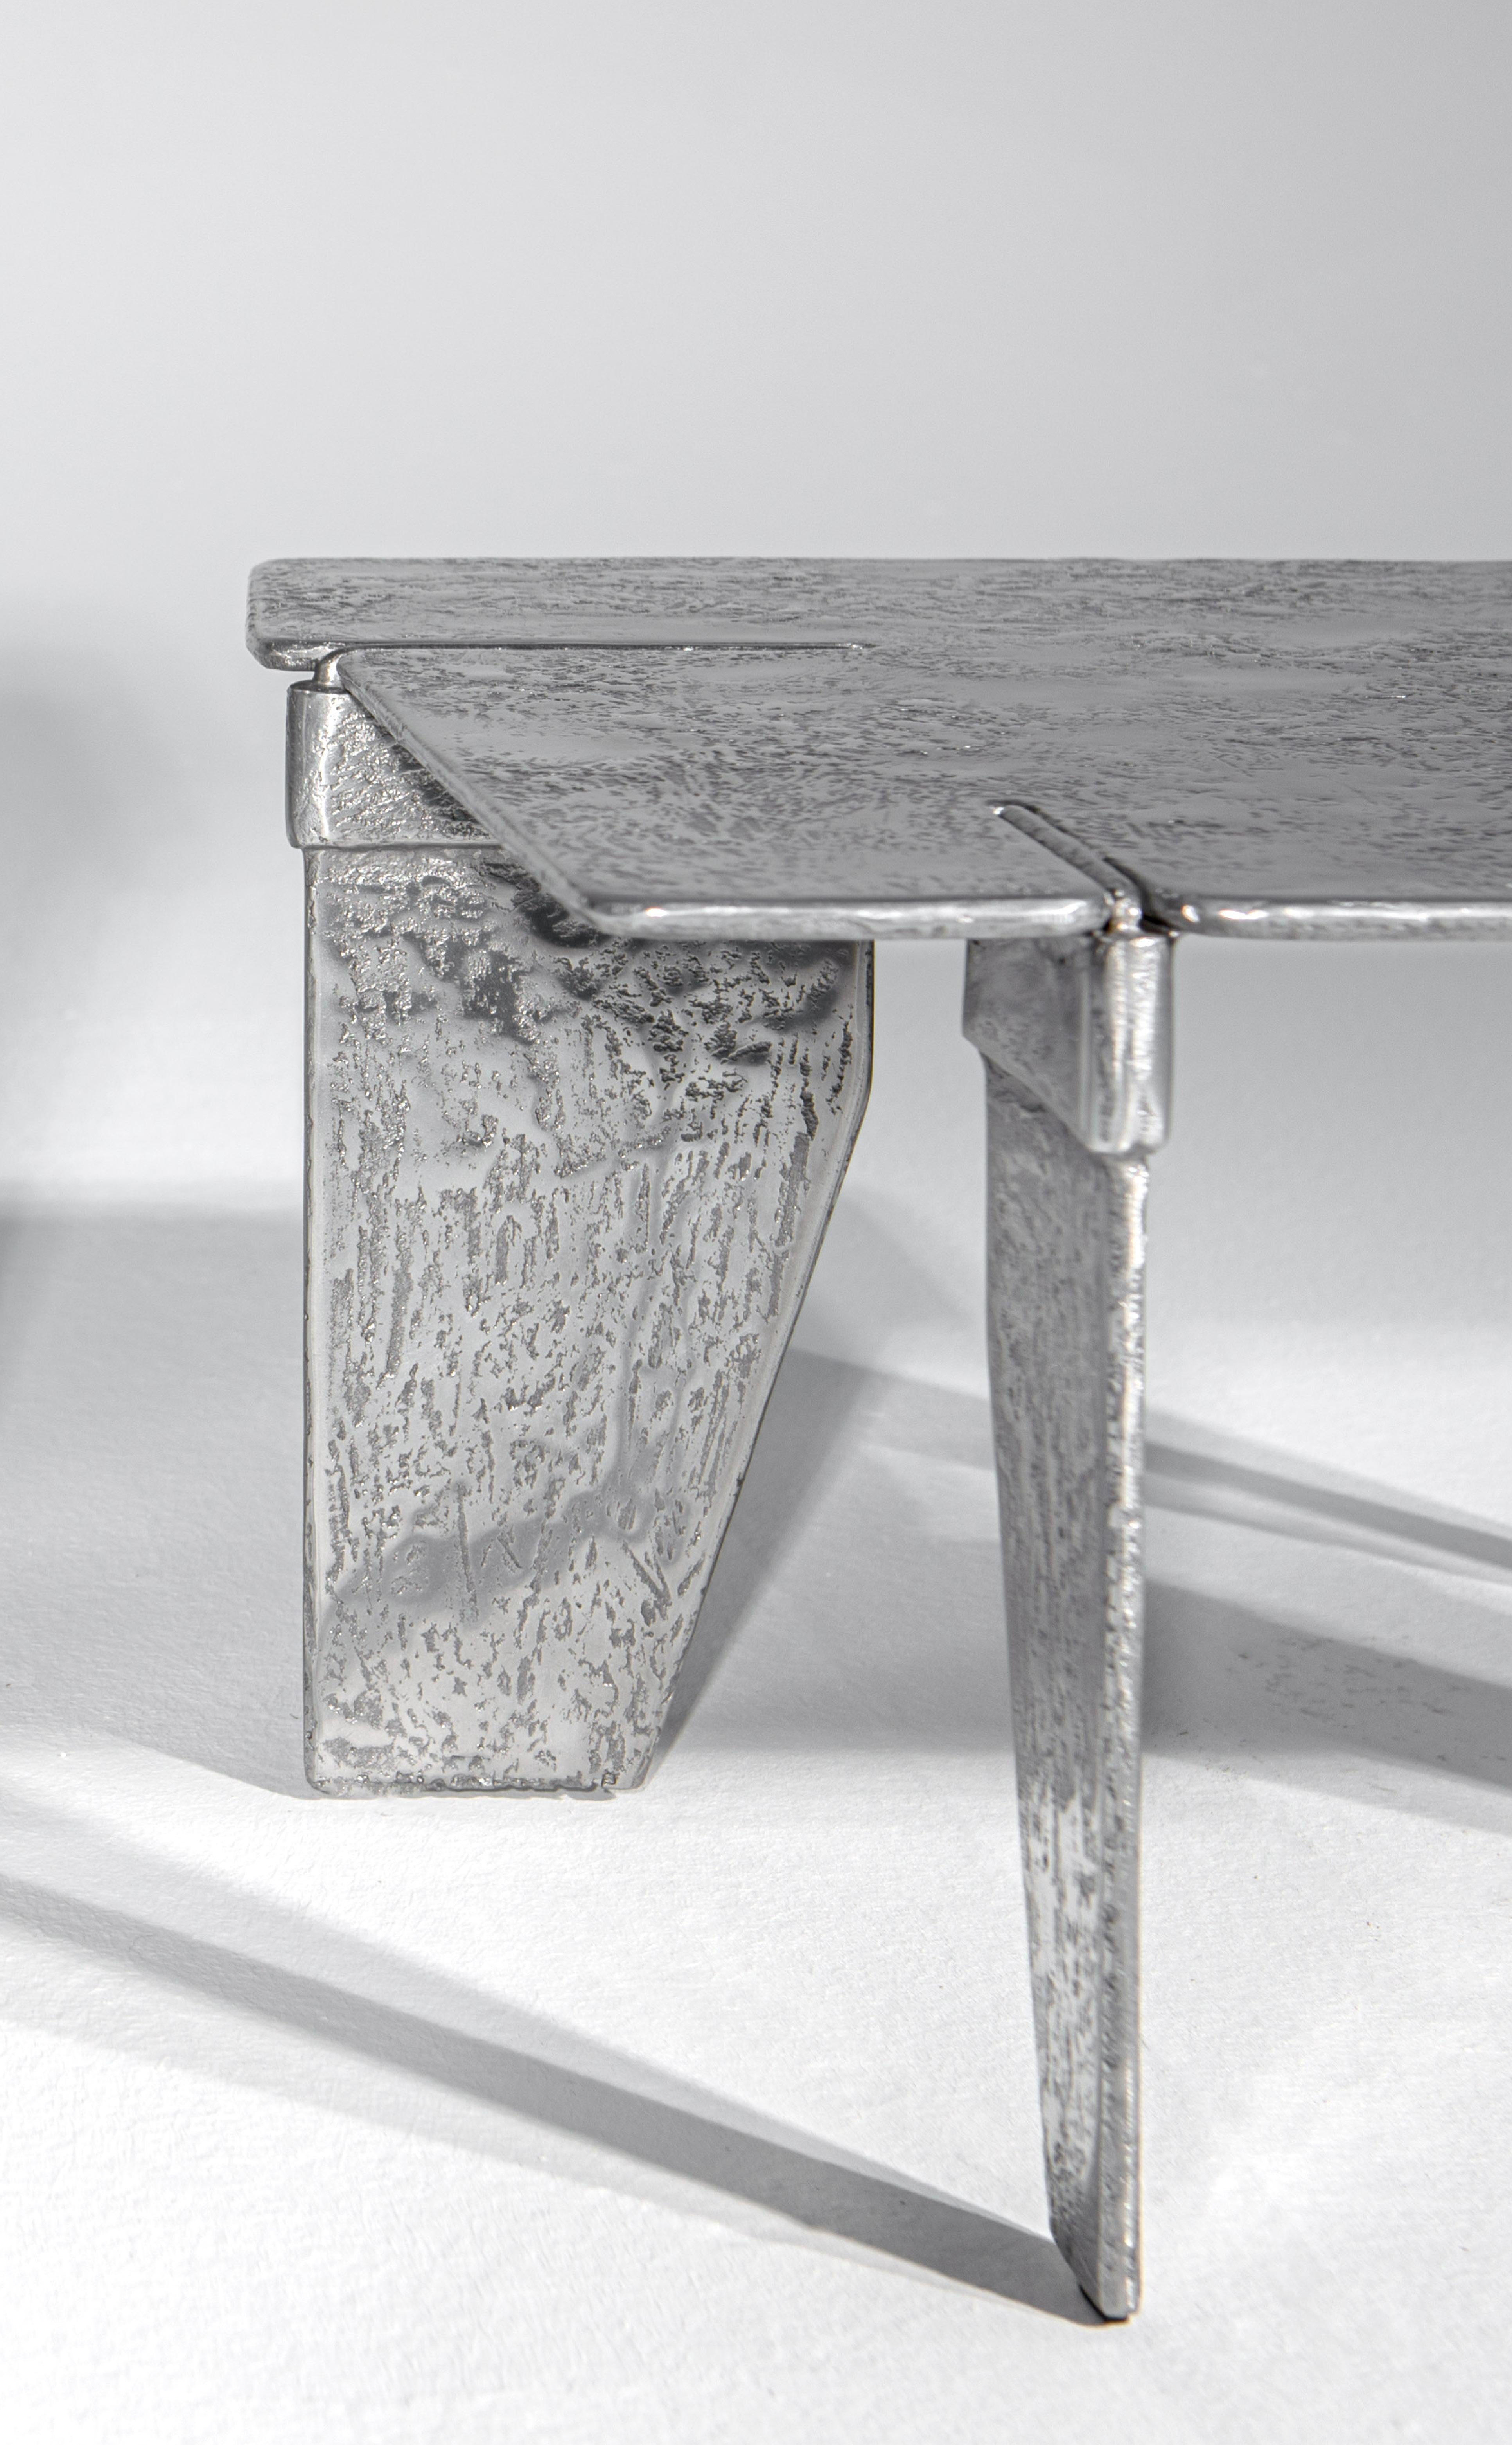 Overlap coffee table is completely made of aluminium. It is obtained by casting the aluminium into special molds made of sand. The sculptural look of the surface and the use of metal as raw material makes this item a contemporary artwork.